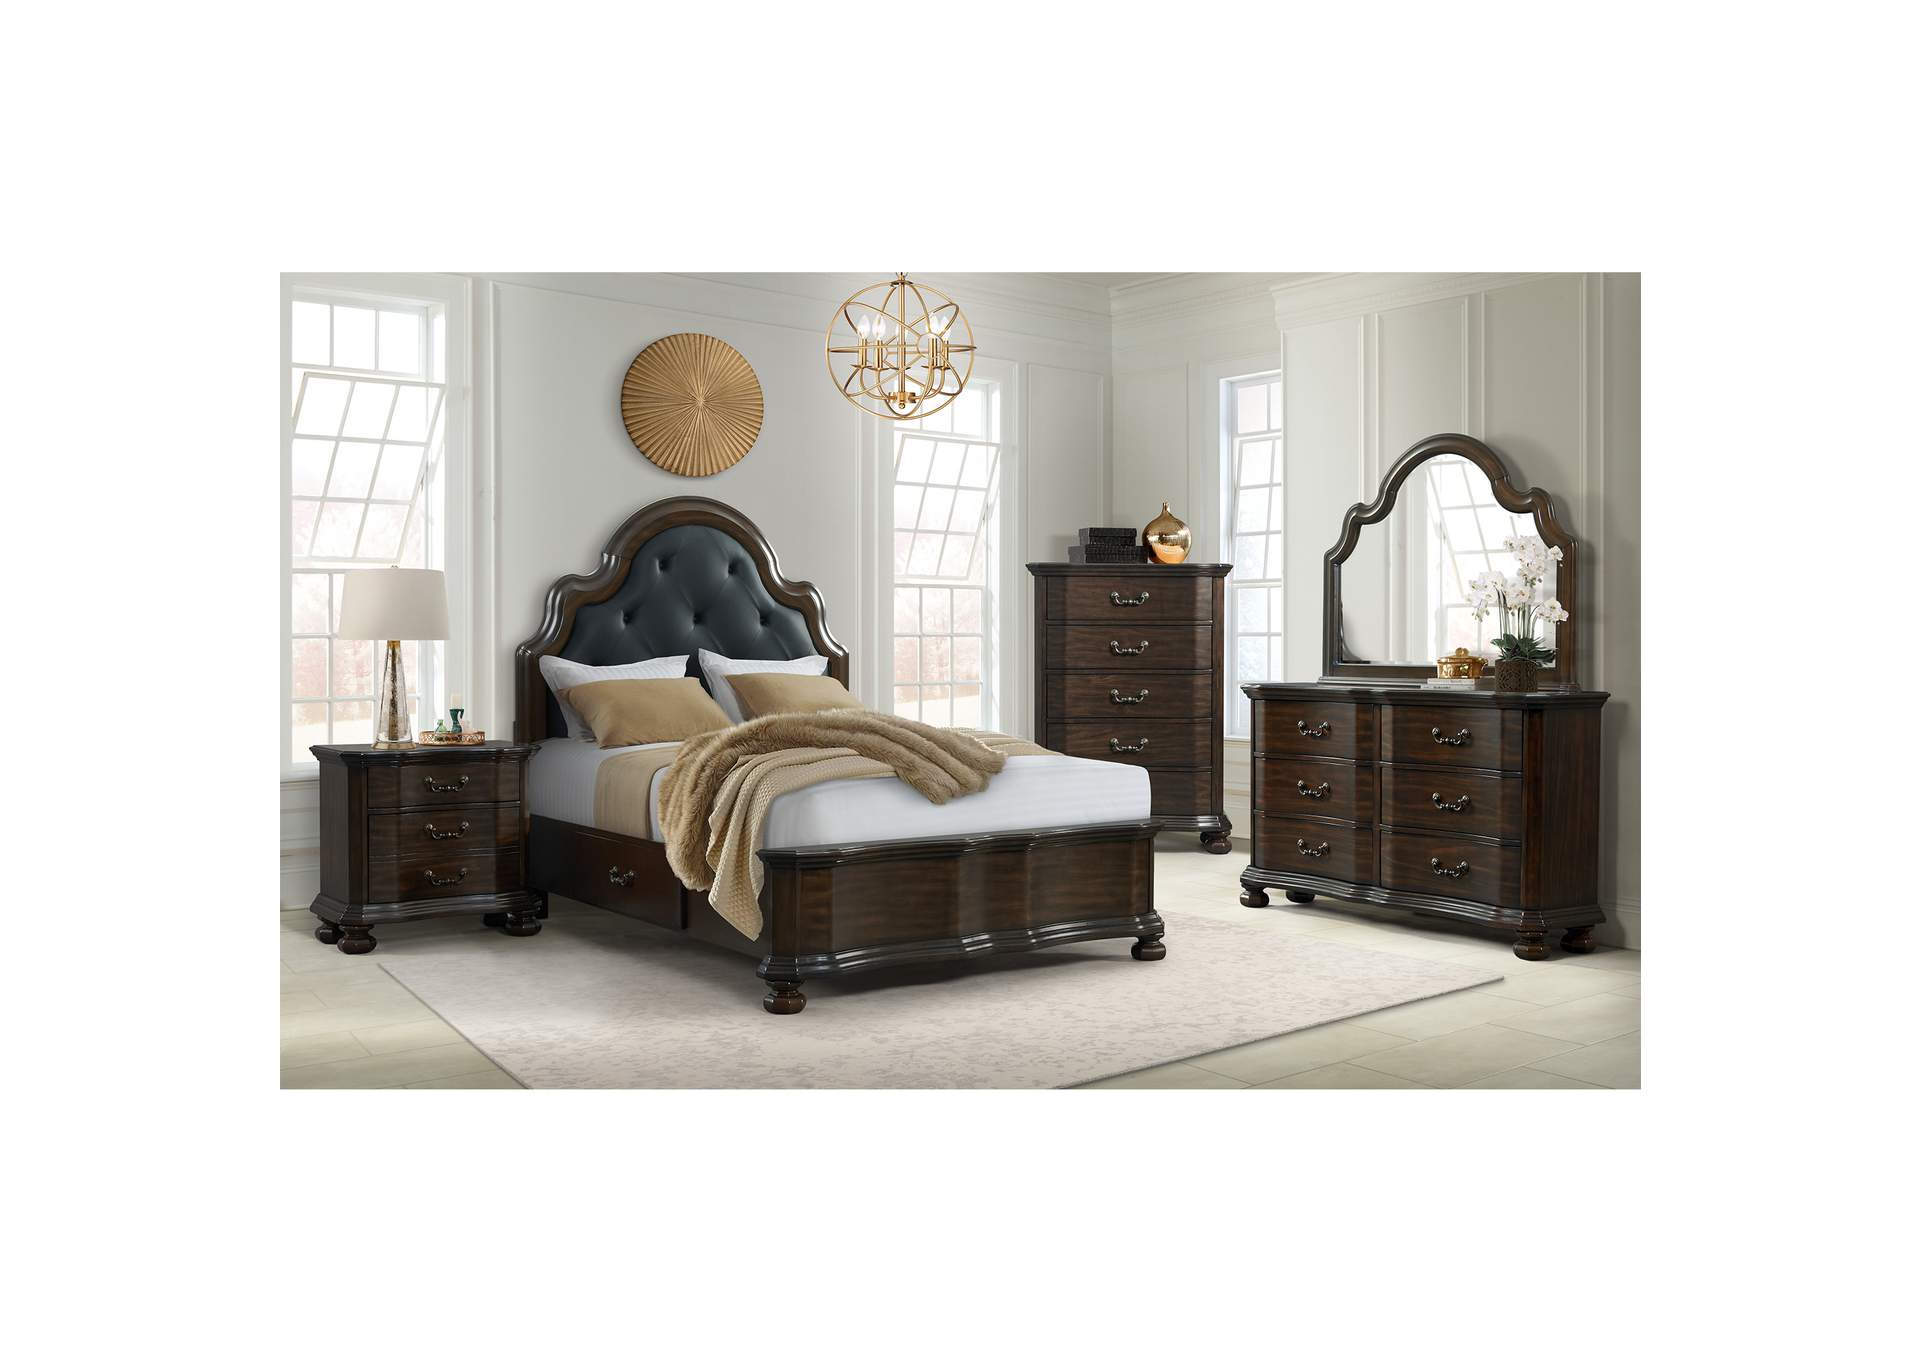 Avery Queen Bed,Elements